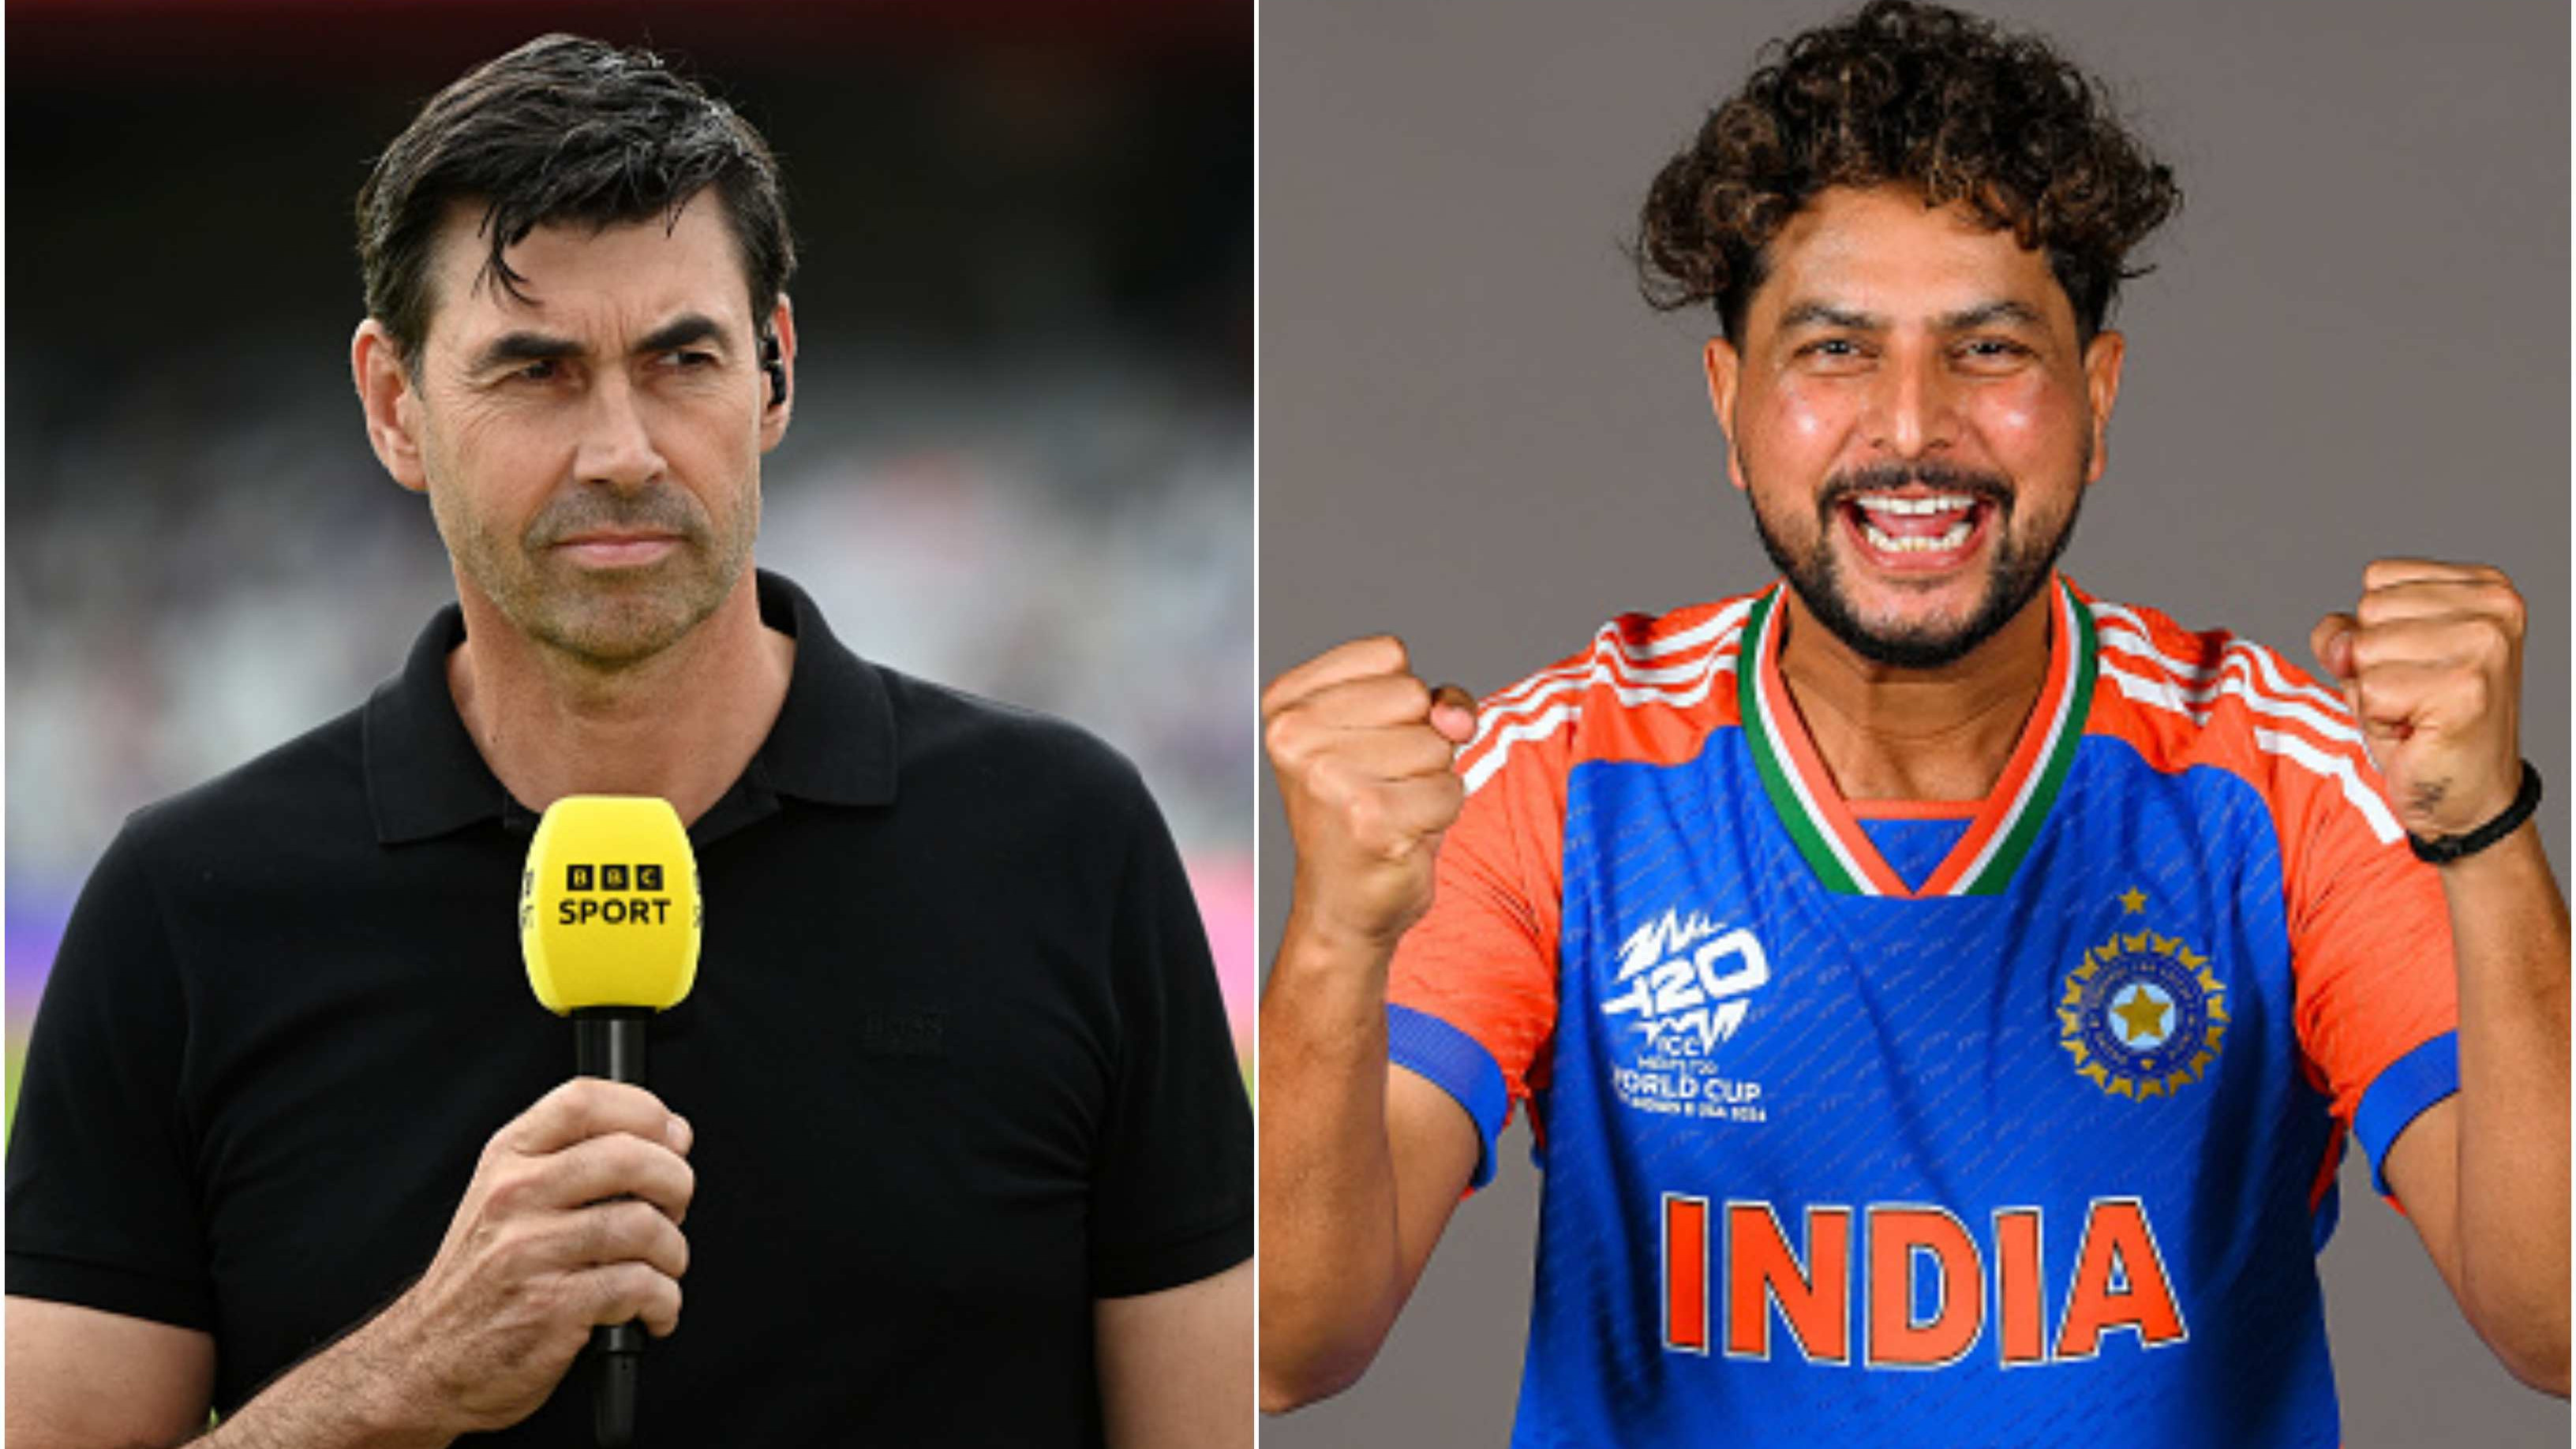 “Extra bit of wicket-taking flair,” Stephen Fleming bats for Kuldeep Yadav’s inclusion in India’s XI ahead of Super 8s